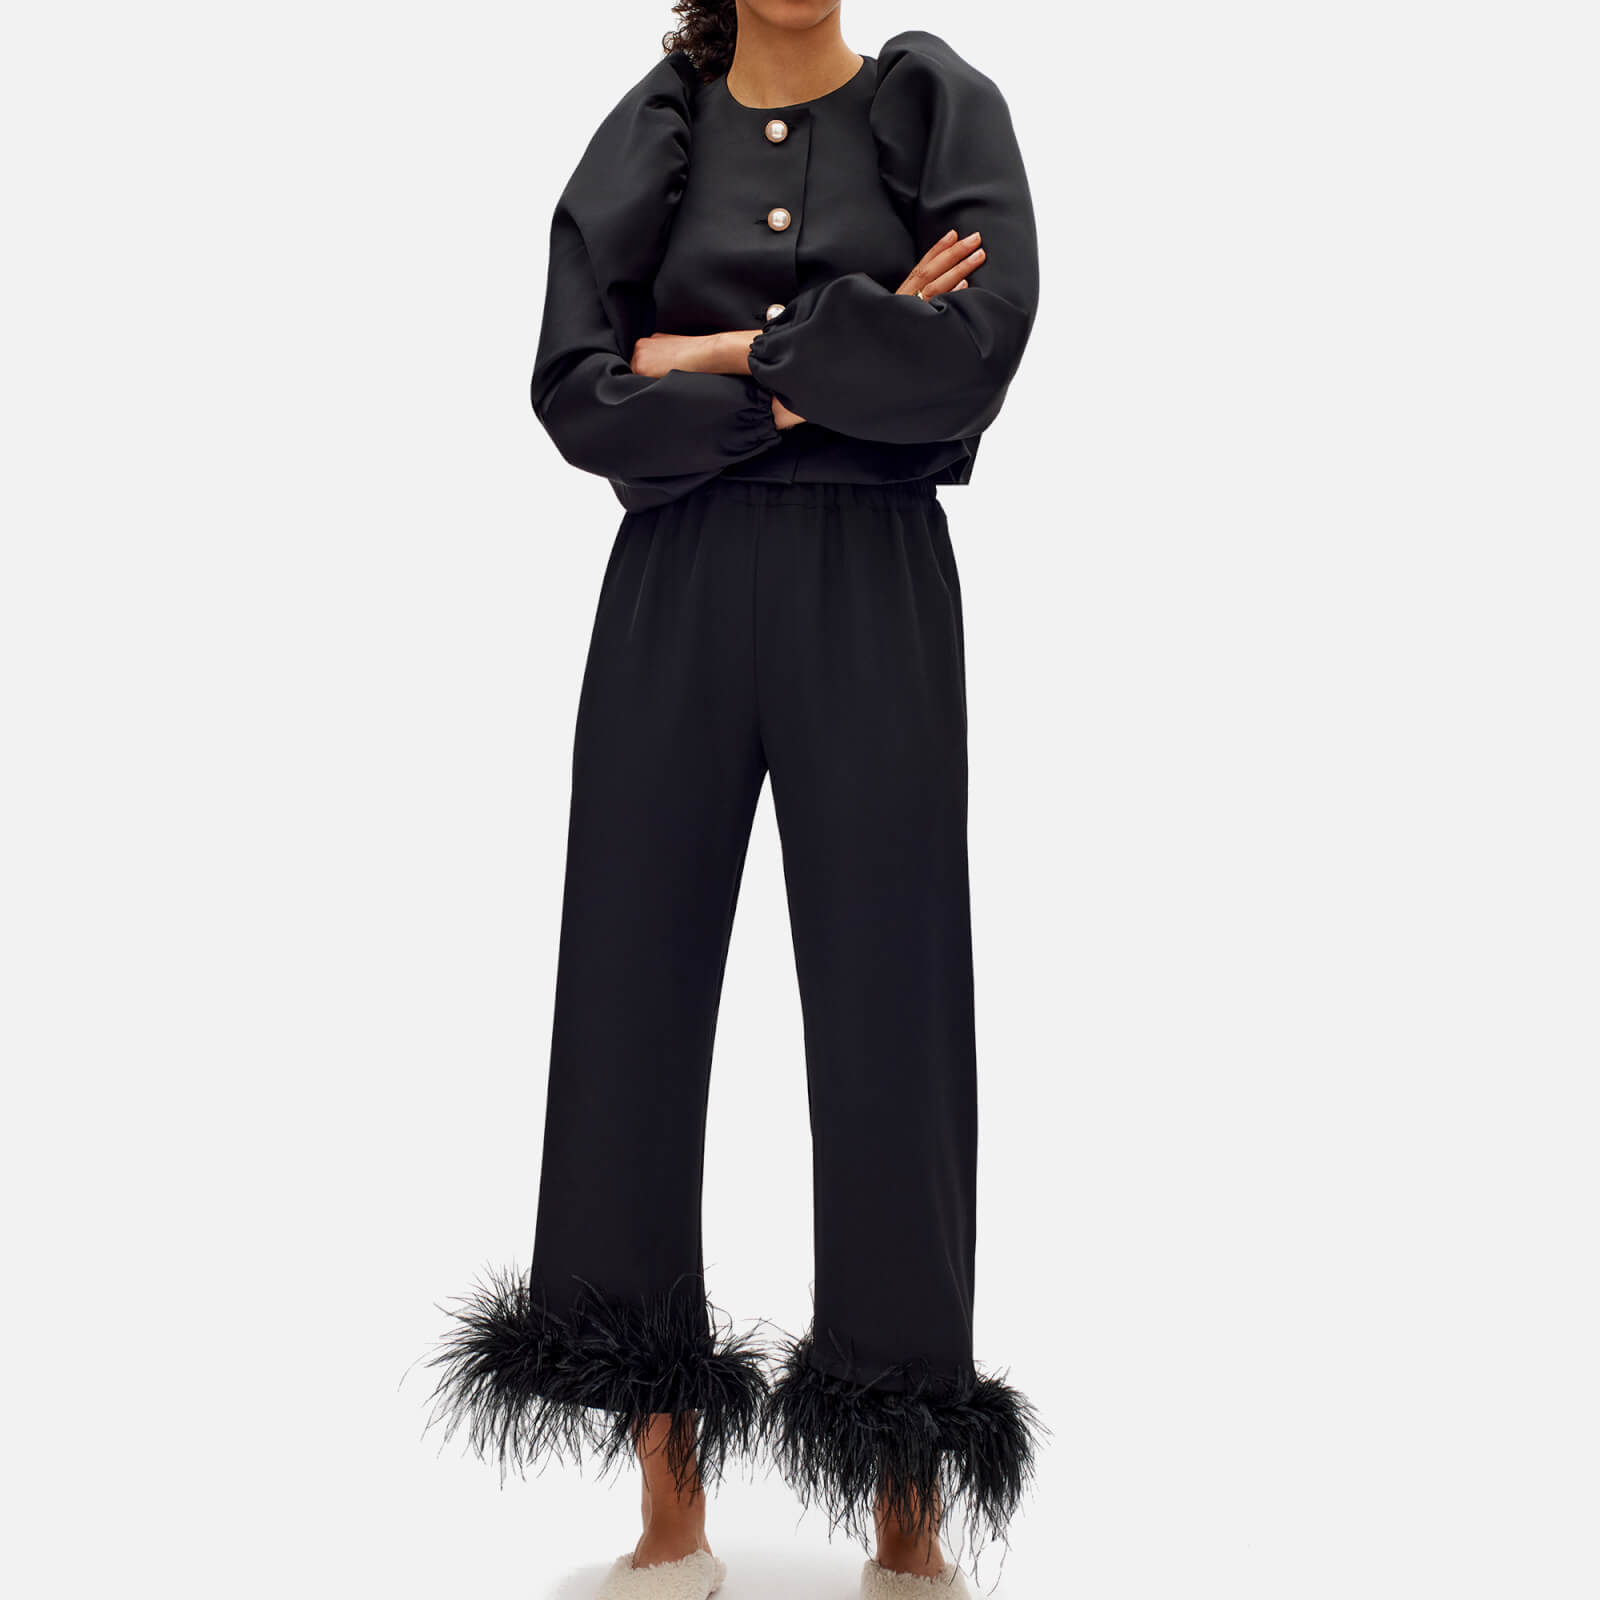 Sleeper Women's Pants Party with Feathers - Black - XS